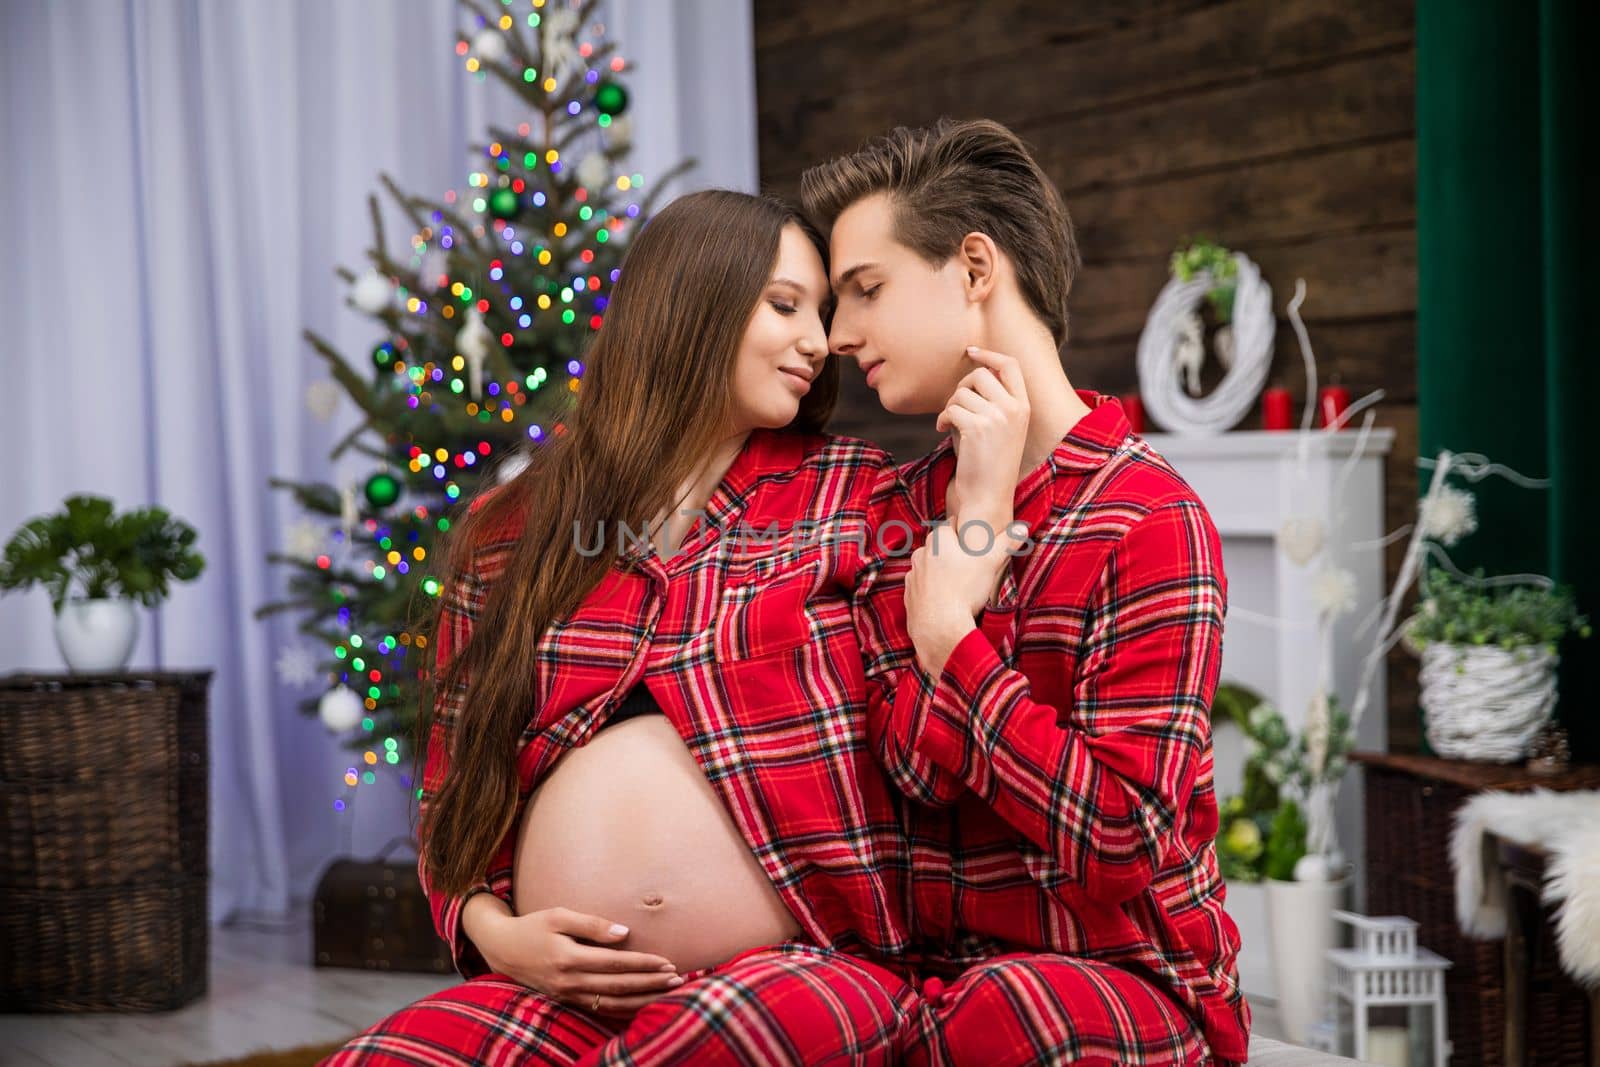 A couple in love show tenderness to each other by hugging and holding hands. The woman sits in front of the man and exposes her pregnant belly. The partners are facing each other.